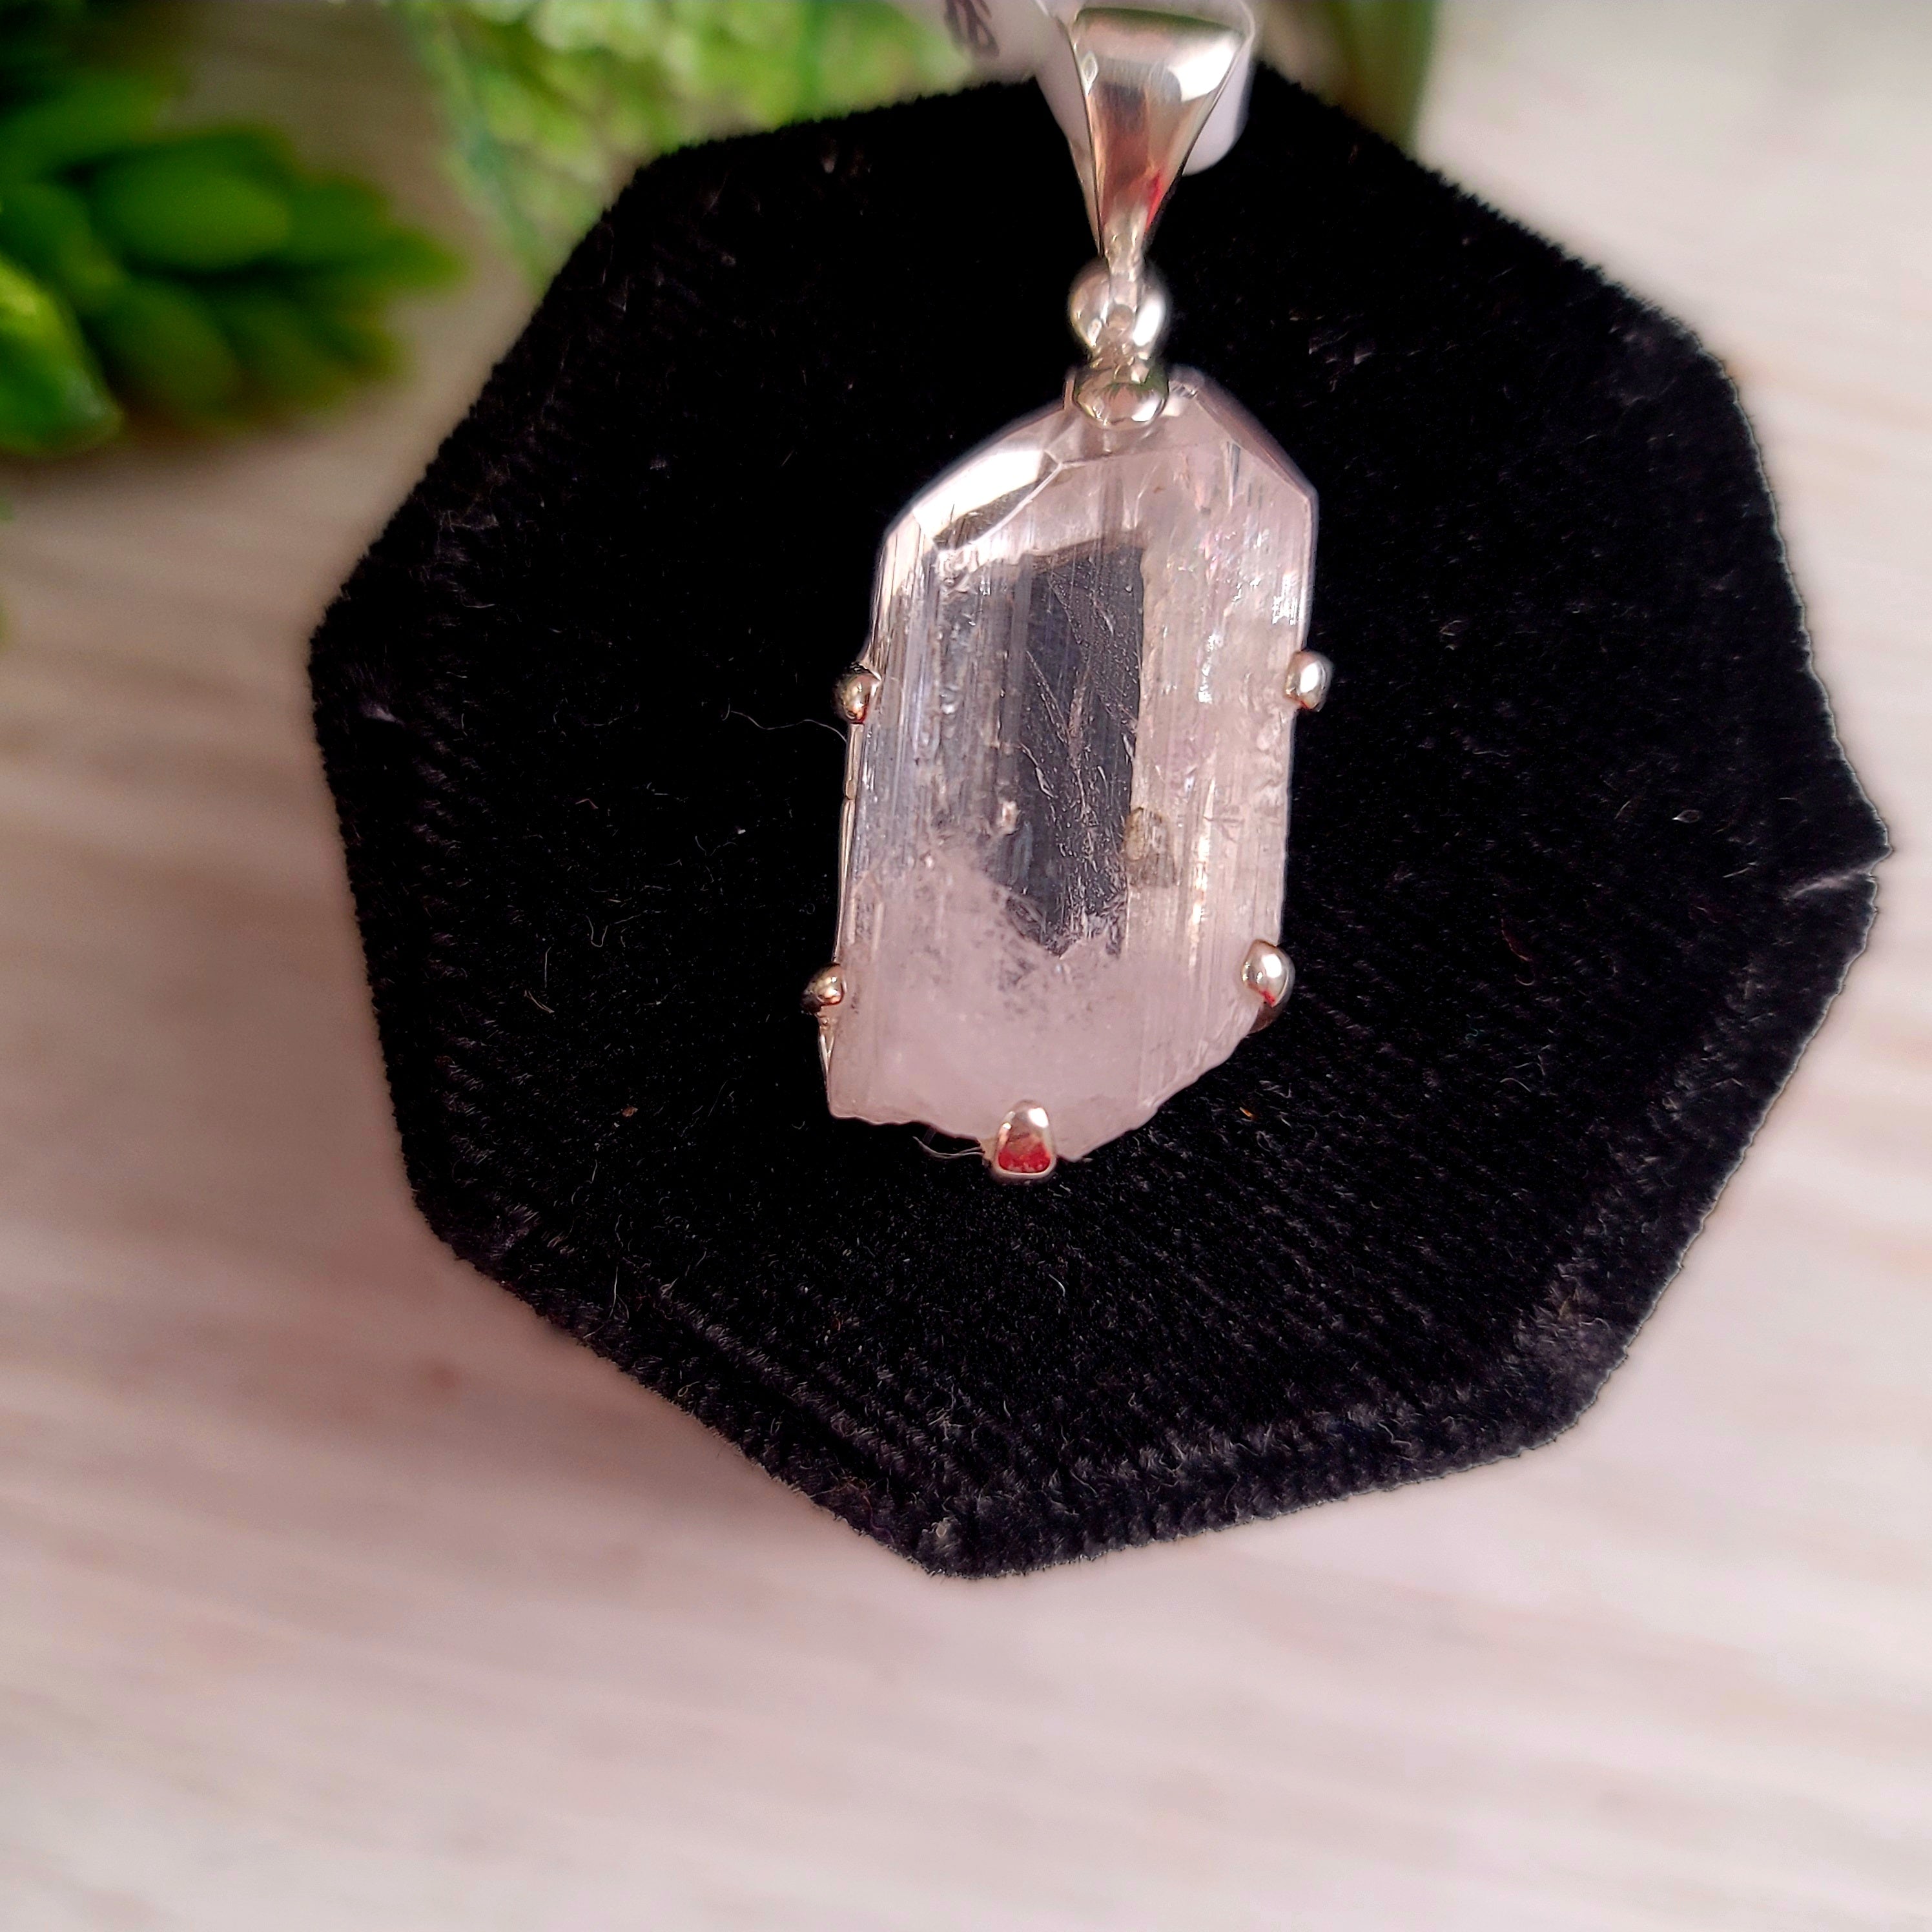 Danburite Pendant for Connection with Higher Realms, Peace and Self Acceptance